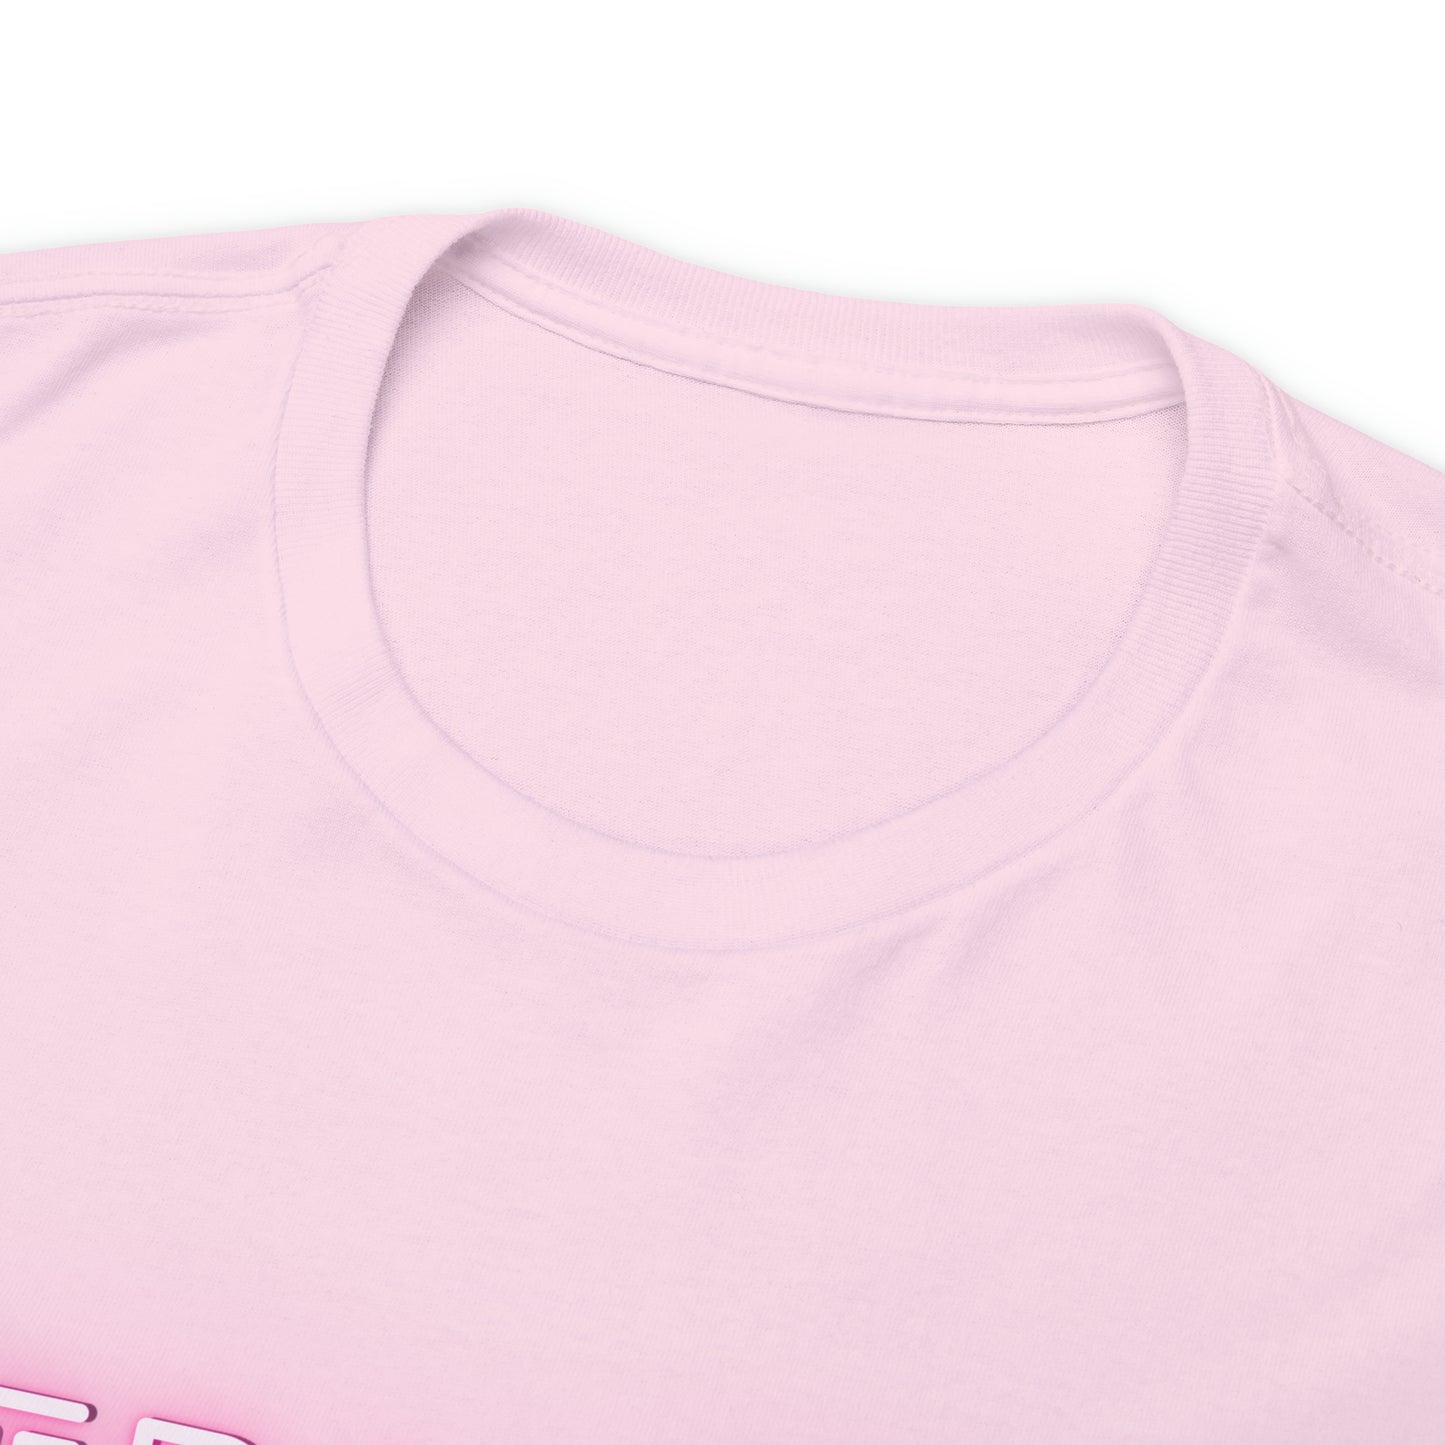 Basic T-Shirt - Women - "Definition" Collection (1430)